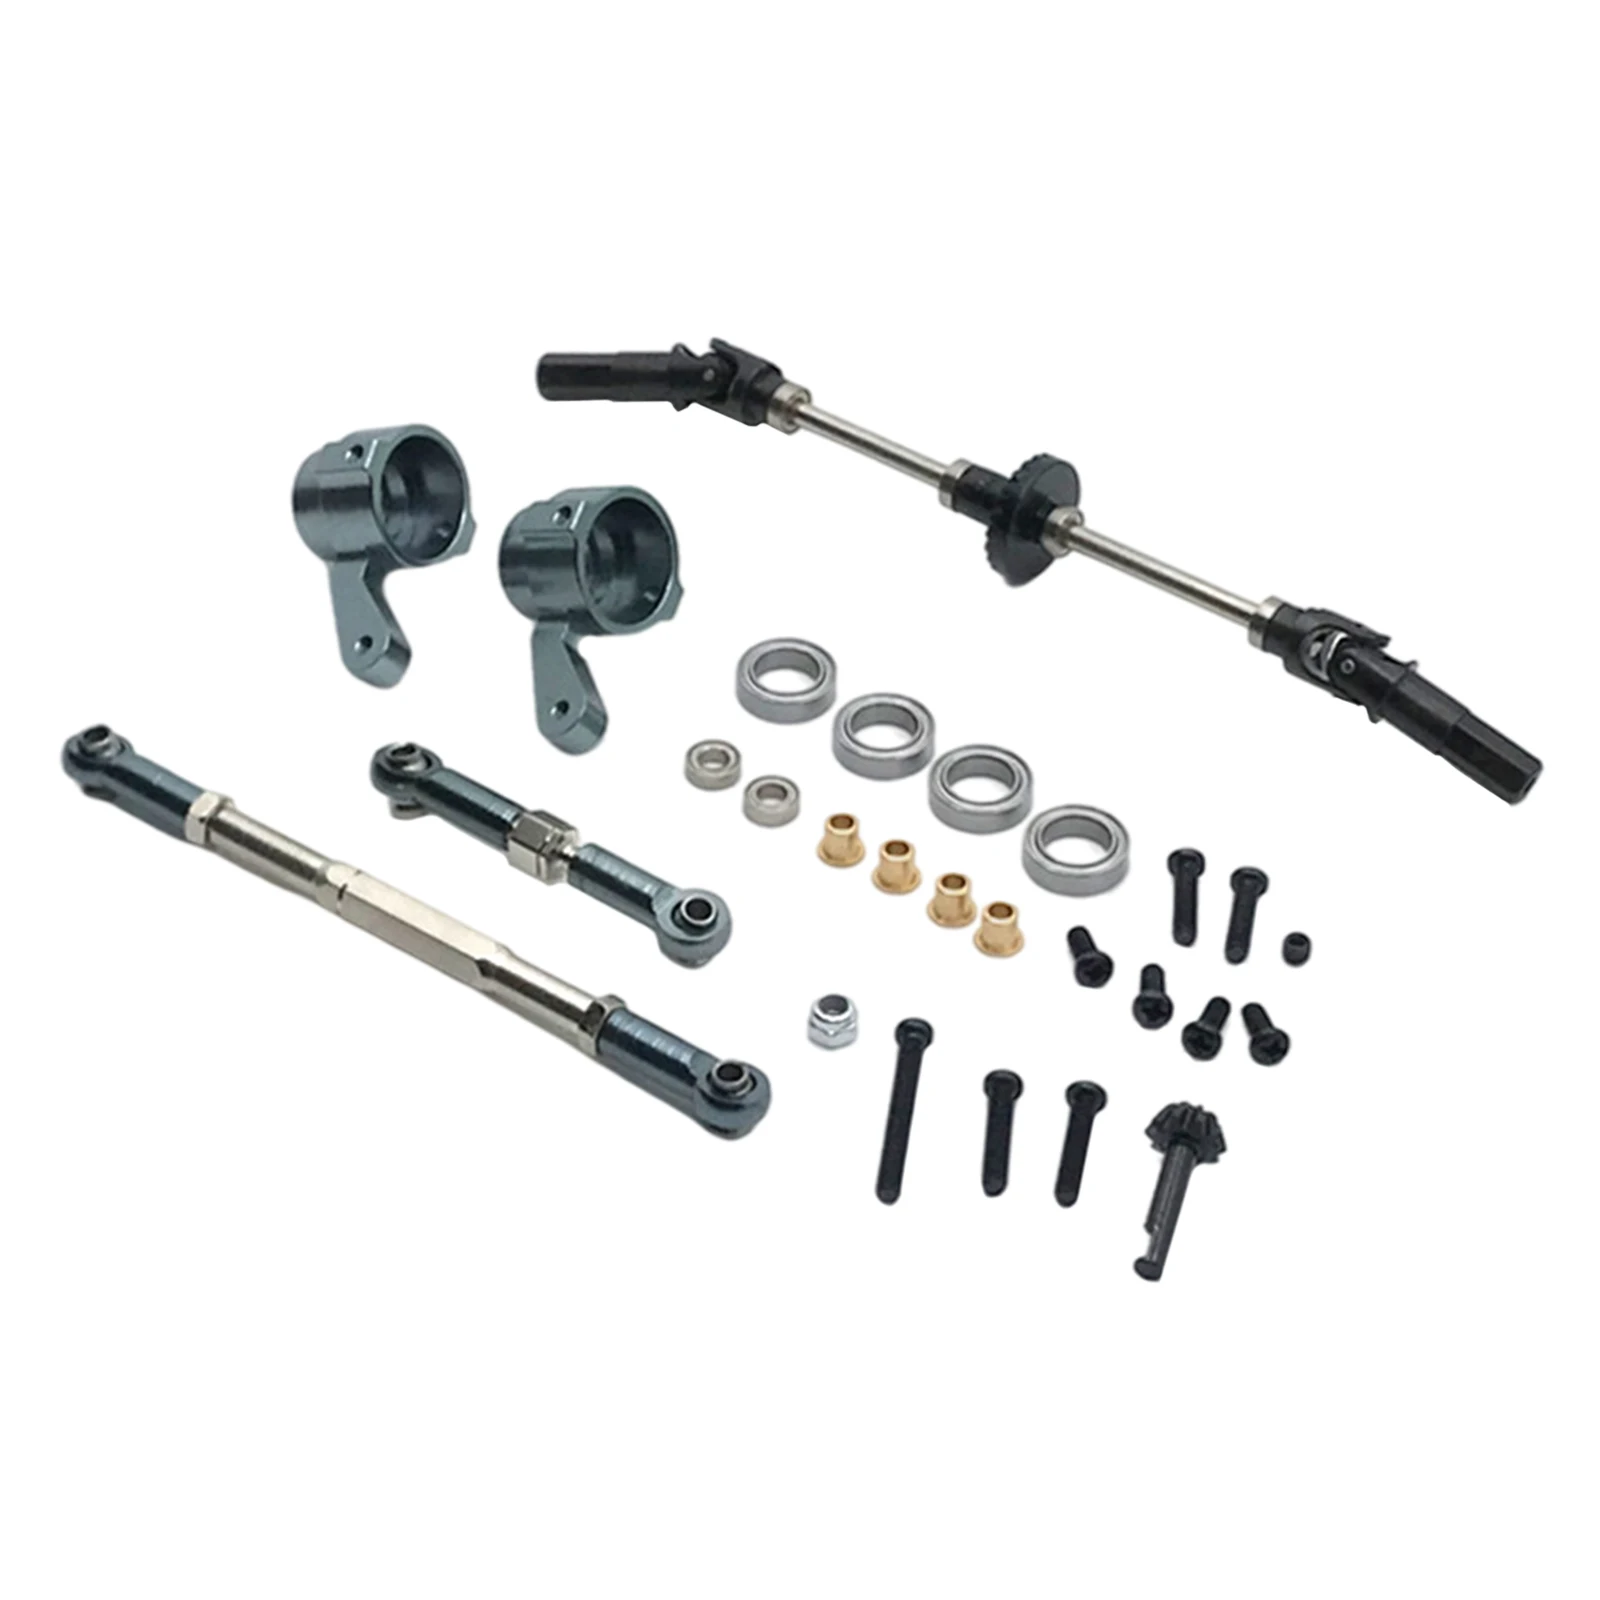 Metal RC Car Front Axle Kits for MN D90 D96 1/12 Truck Car Hobby Model Replacement Modification Accessories